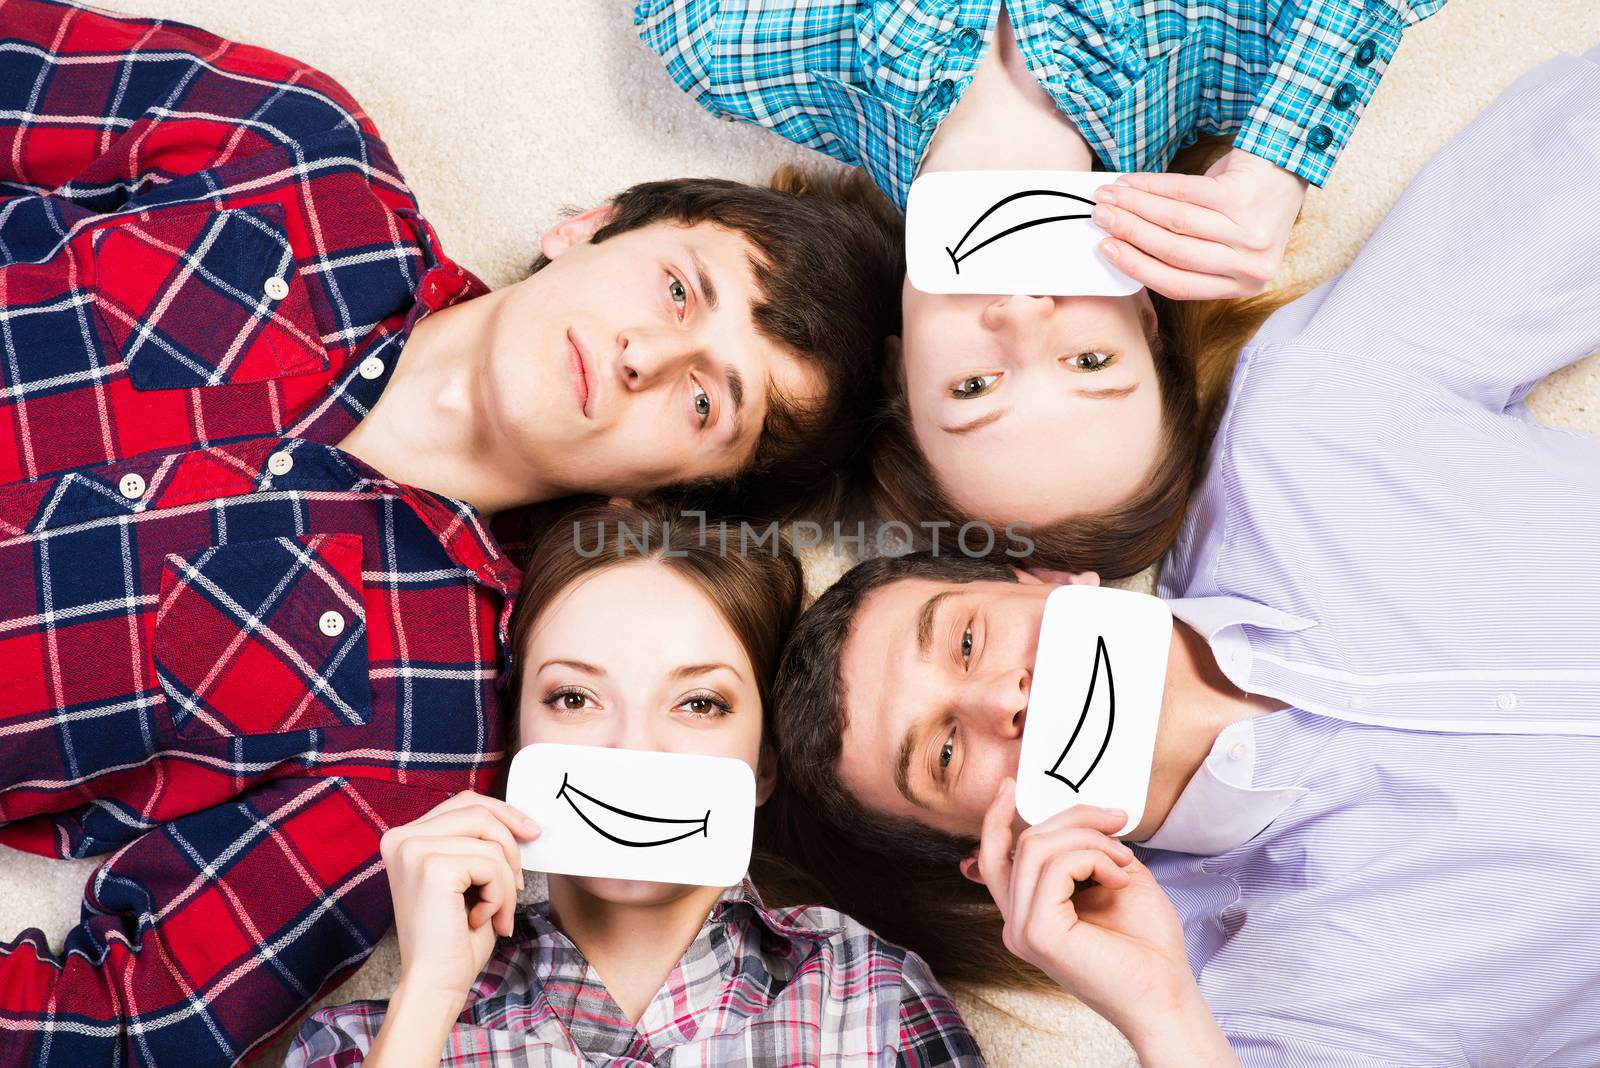 four young men lie together, applied to the face card with smiles